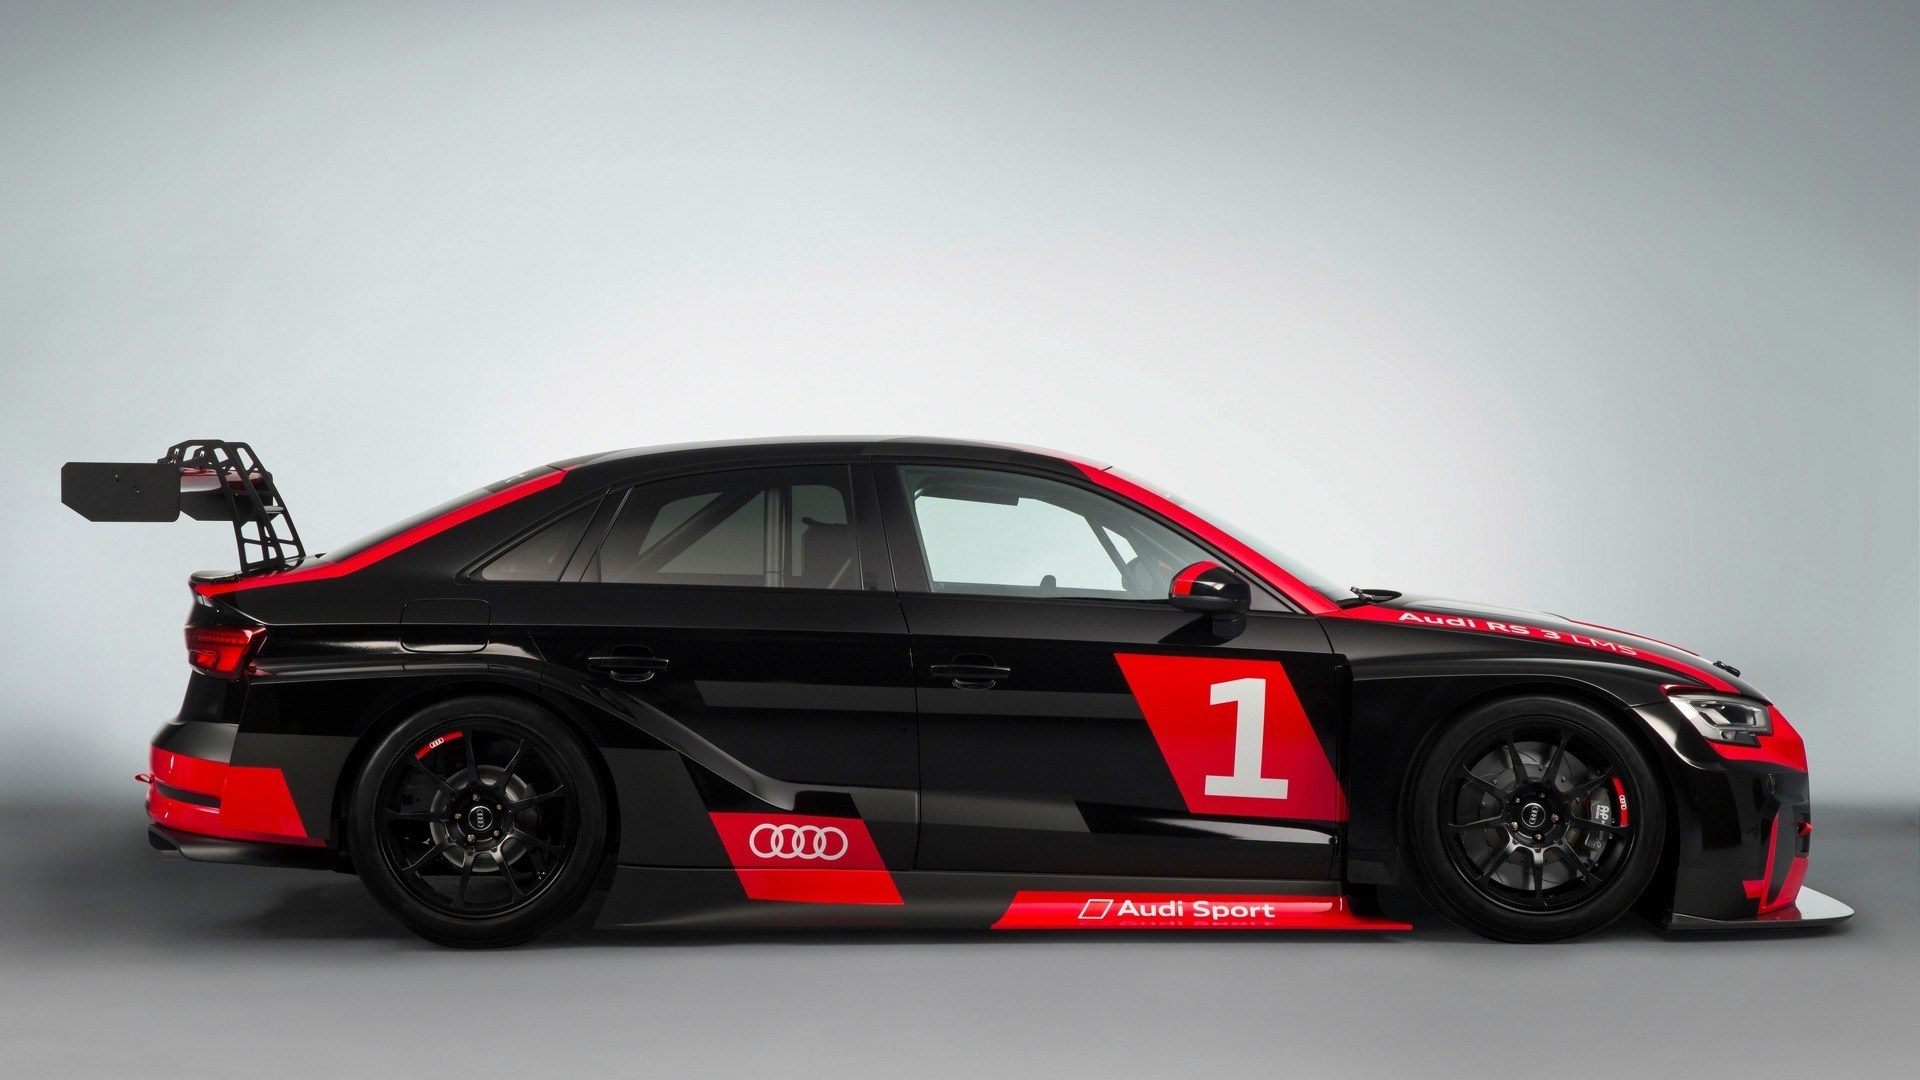 Awesome Audi Rs 3 Lms Racing Car Is Ready For Tcr A3 Wallpaper 1920x1080